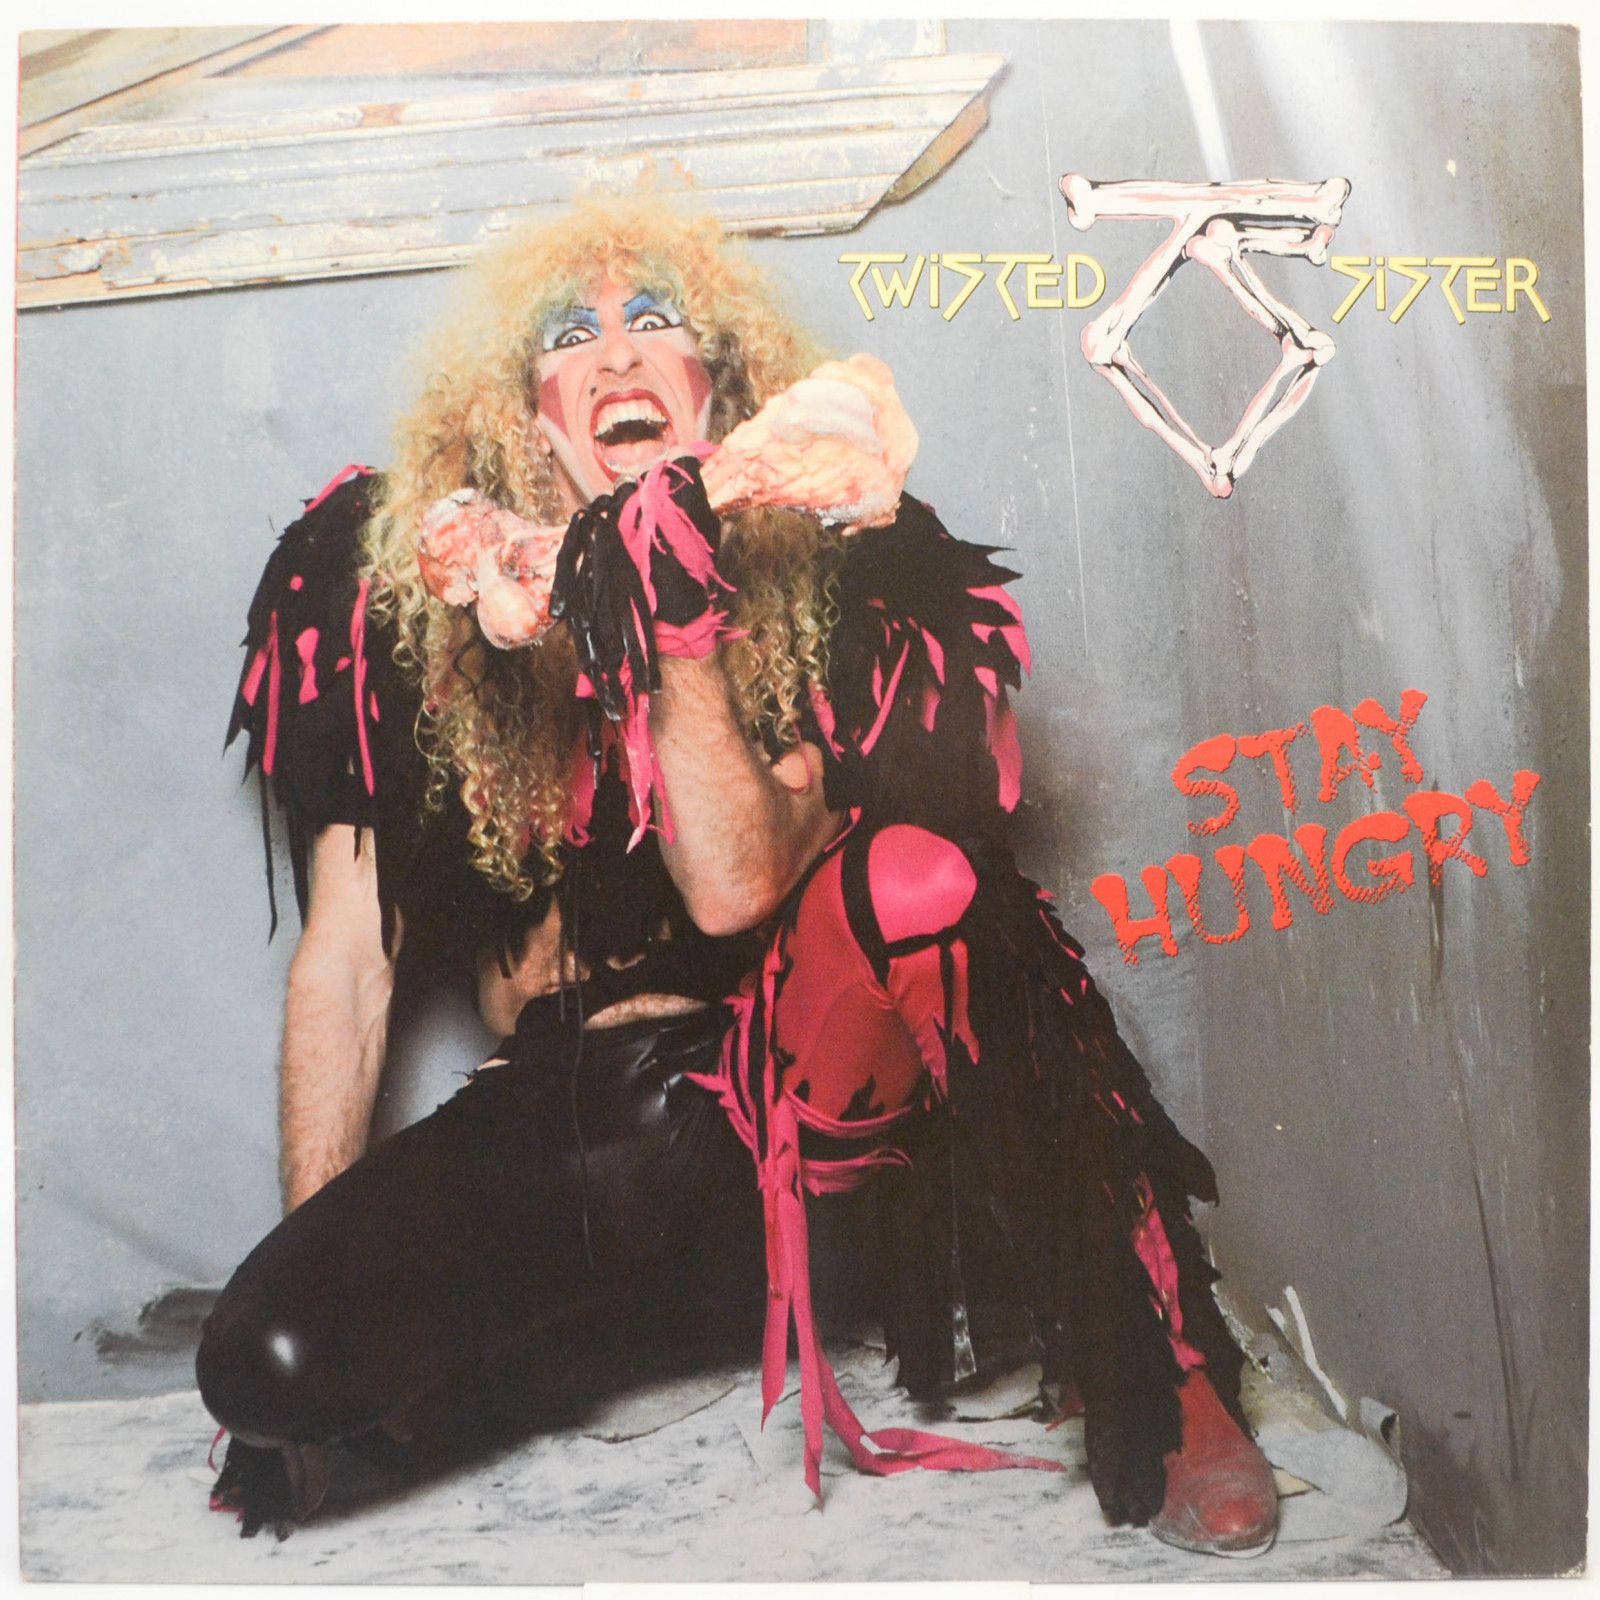 Twisted Sister — Stay Hungry, 1984